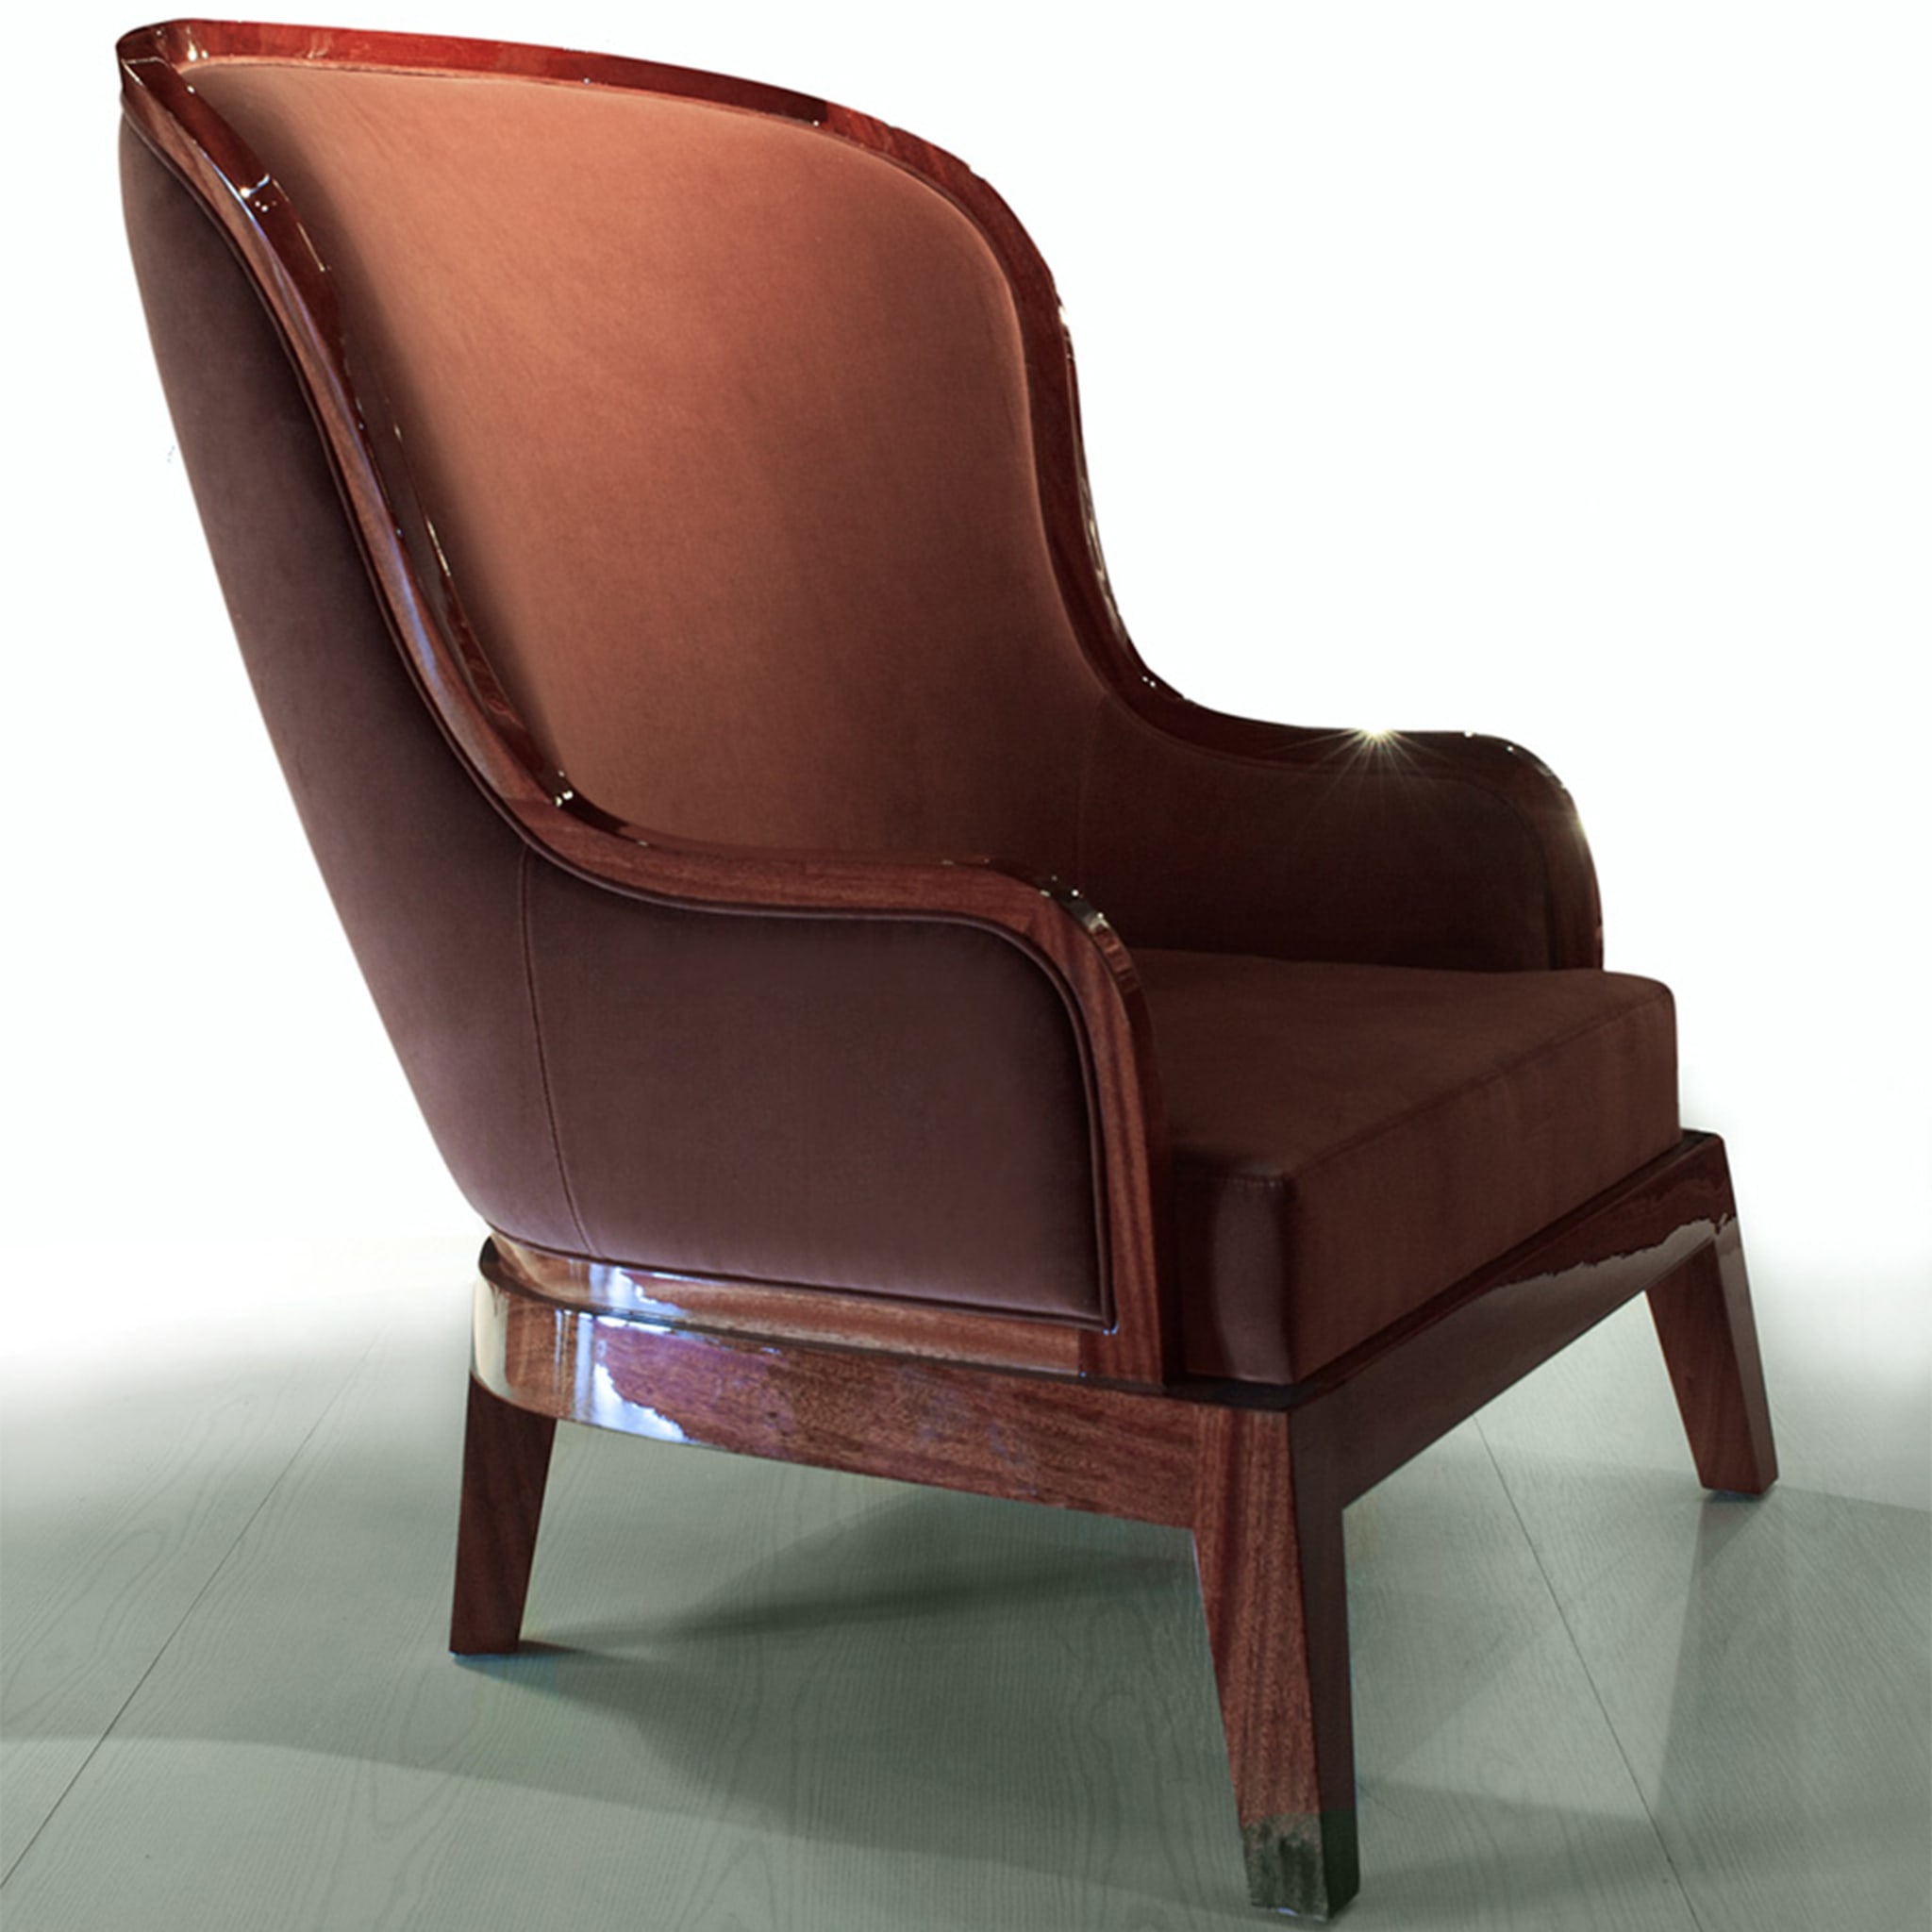 Curzon Armchair by Archer Humphryes Architects - Alternative view 2